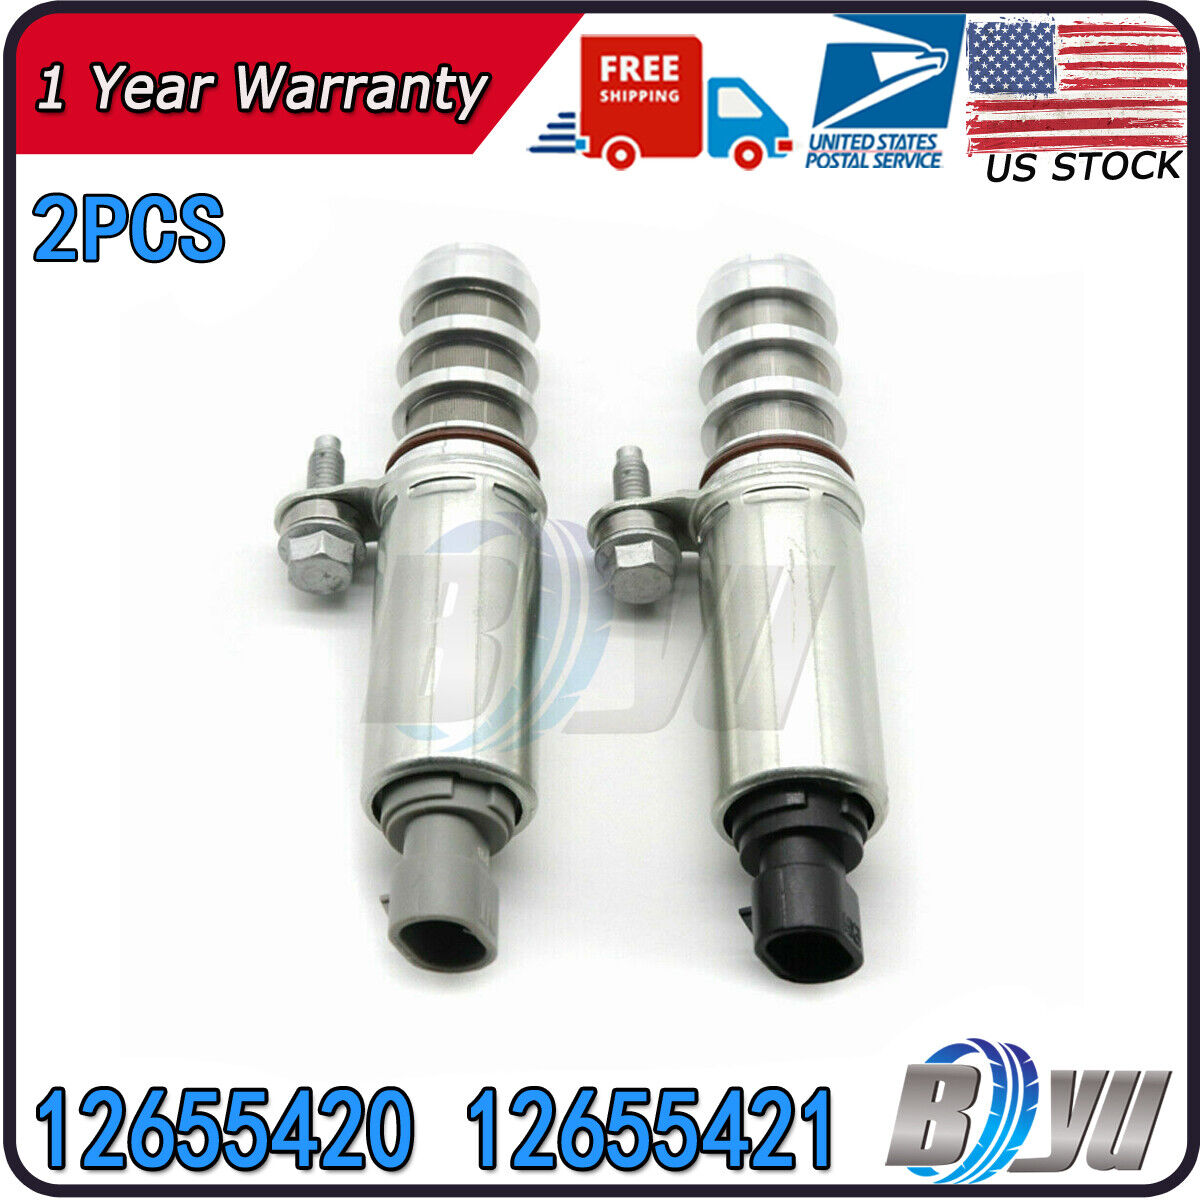 2Pcs New Variable Valve Timing VVT Solenoid 12655420 12655421 For GM Buick Chevy